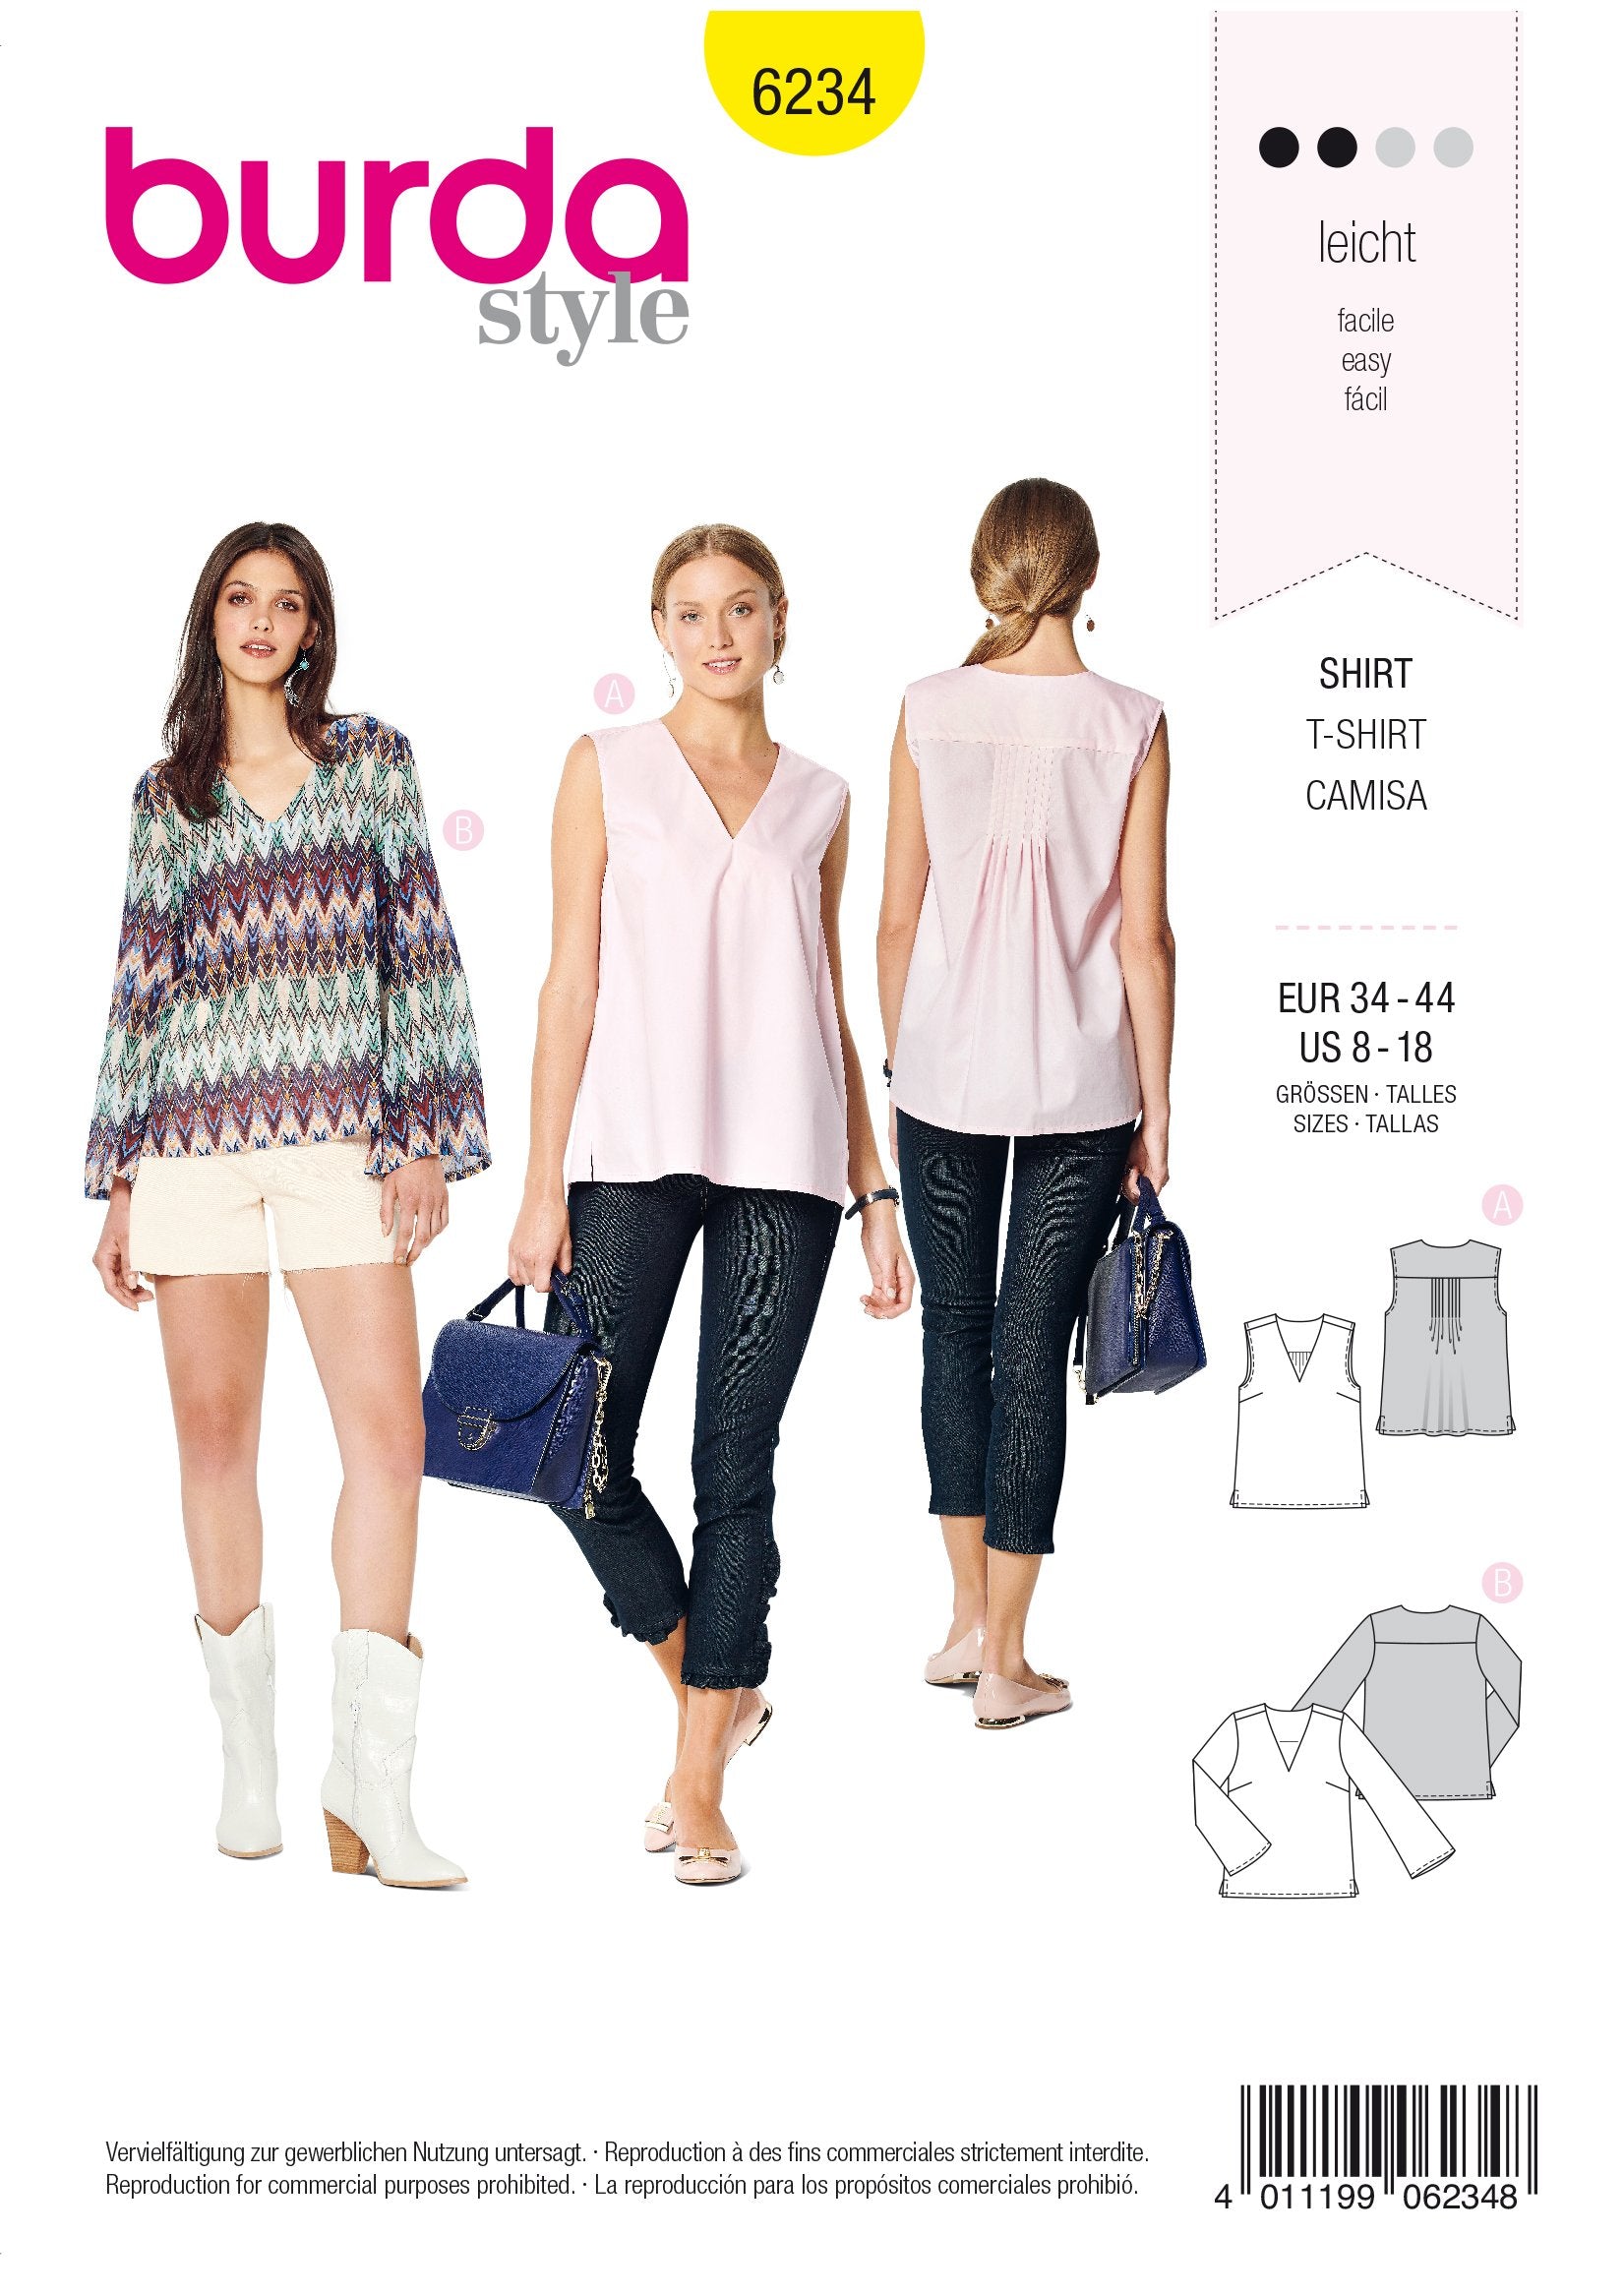 Burda Style Pattern 6234 Misses' Tops With Variations from Jaycotts Sewing Supplies